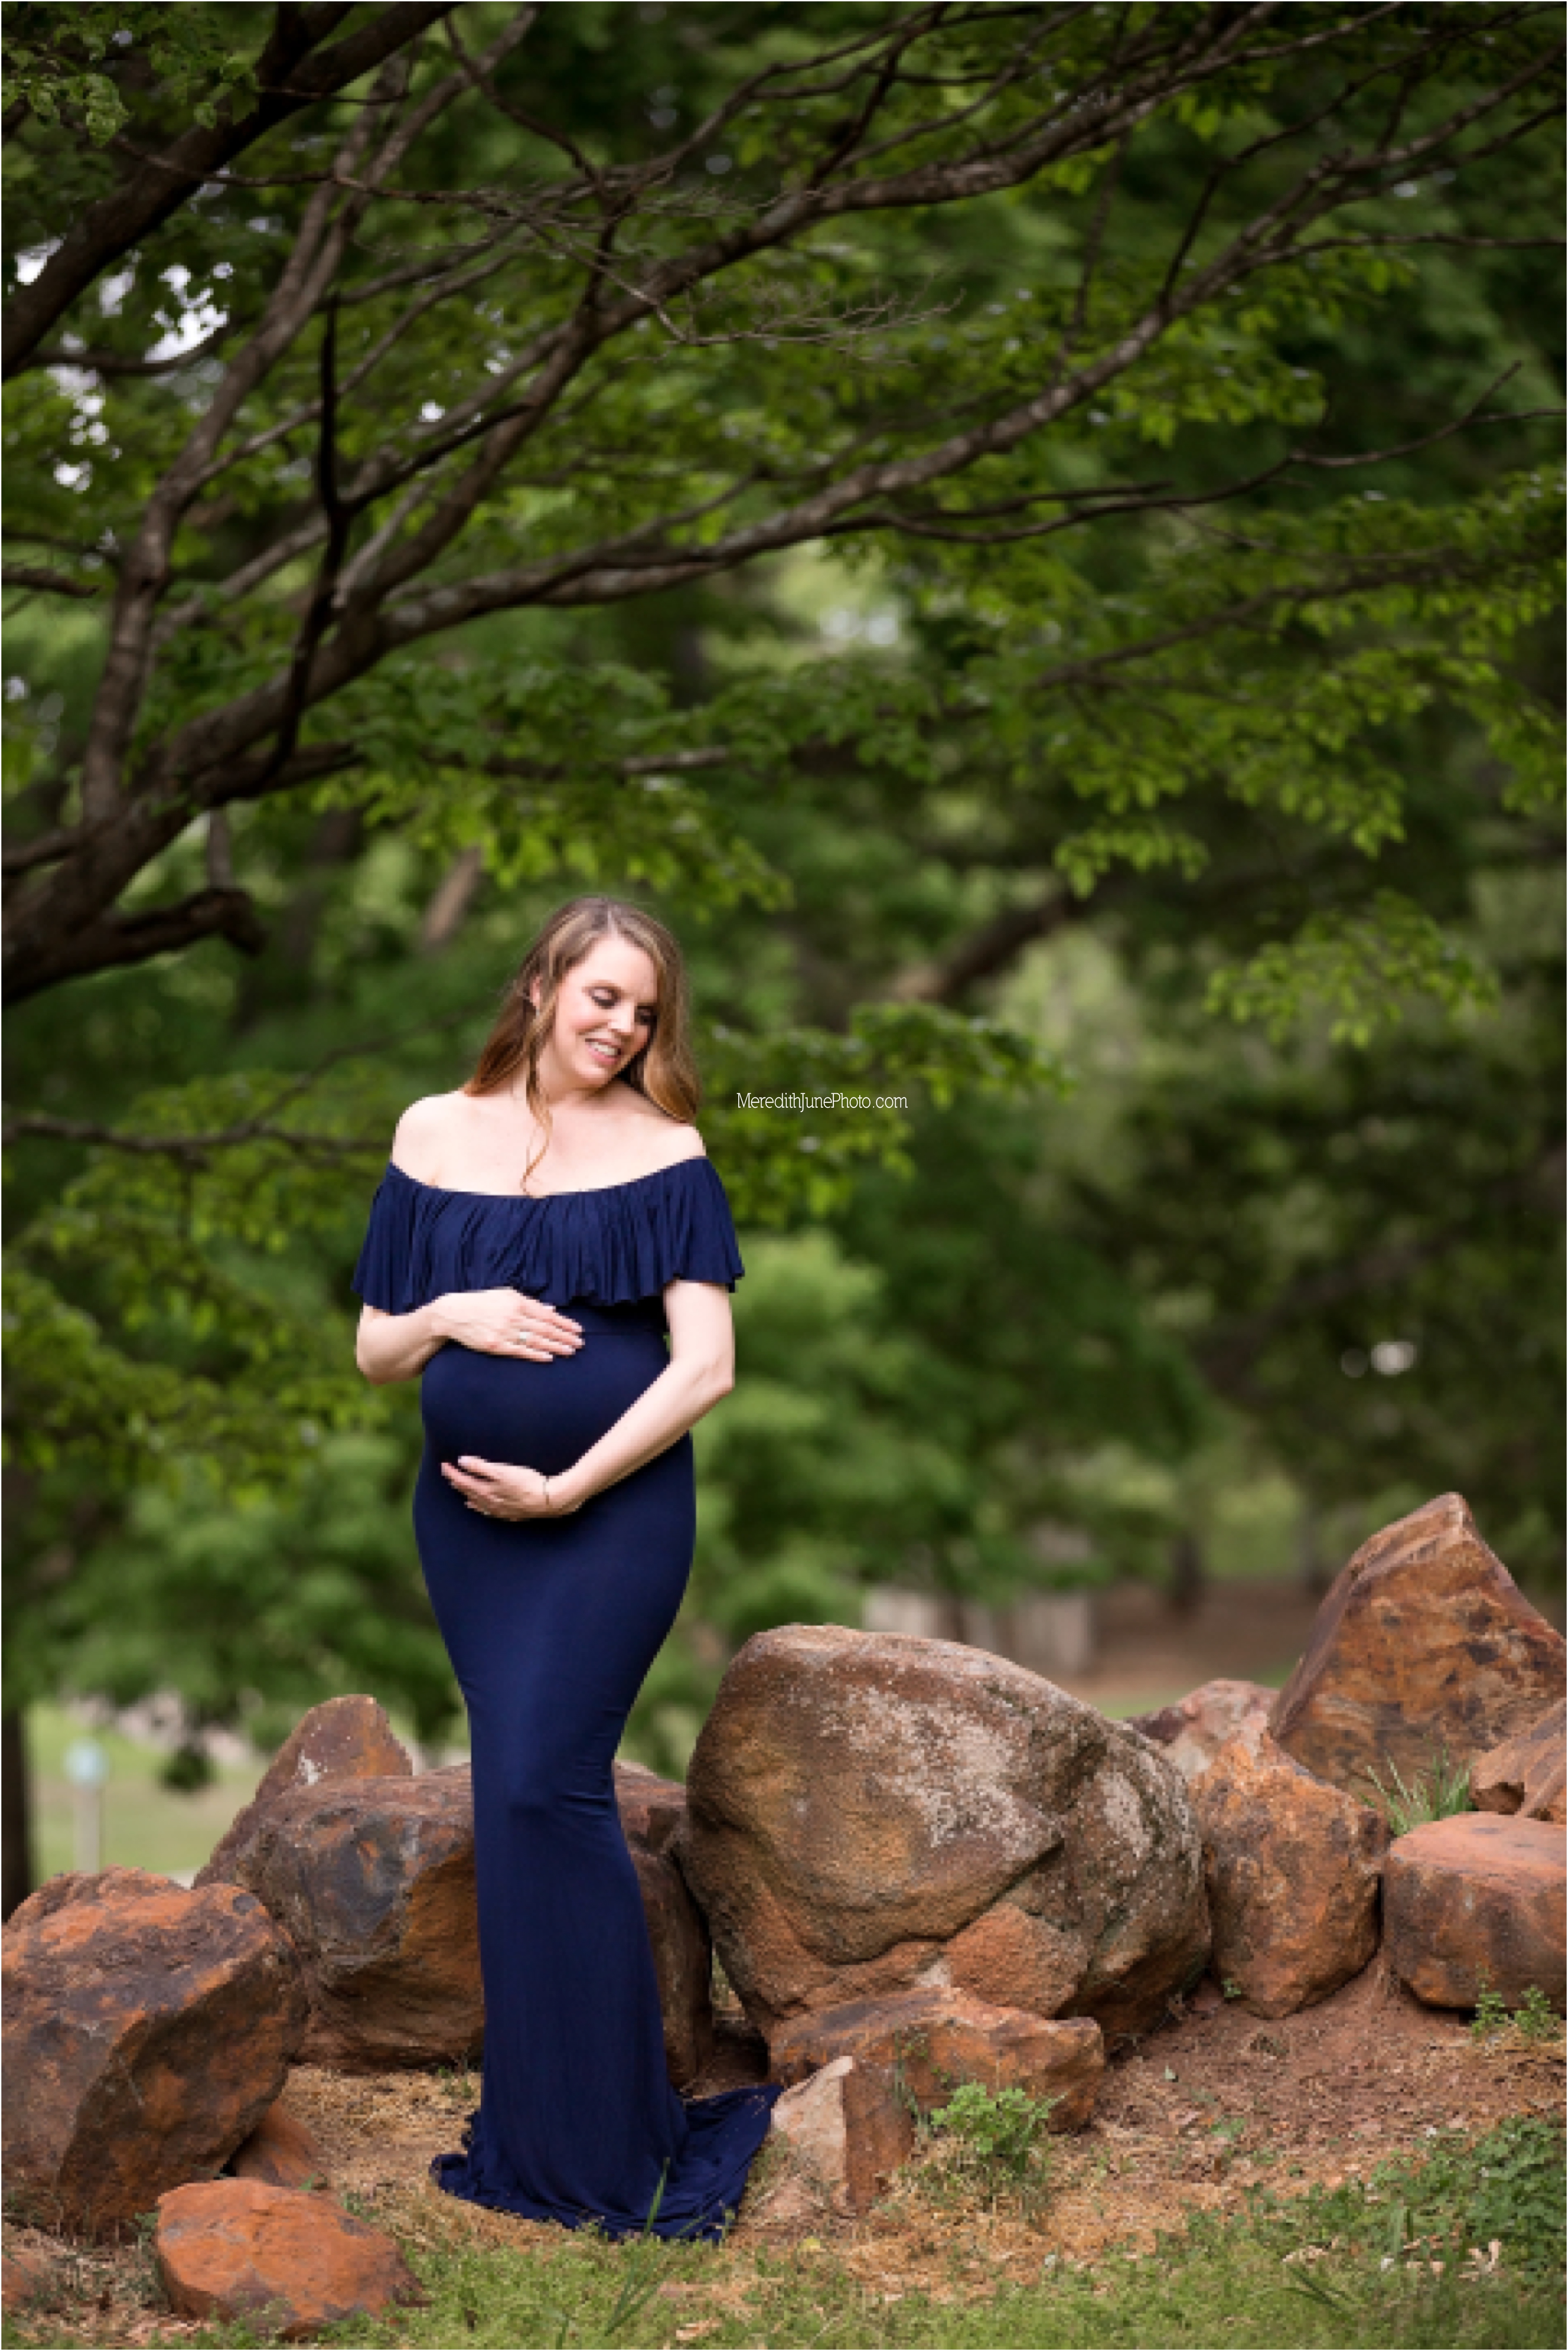 Outdoor maternity session at Anne Springs Greenway in South Carolina